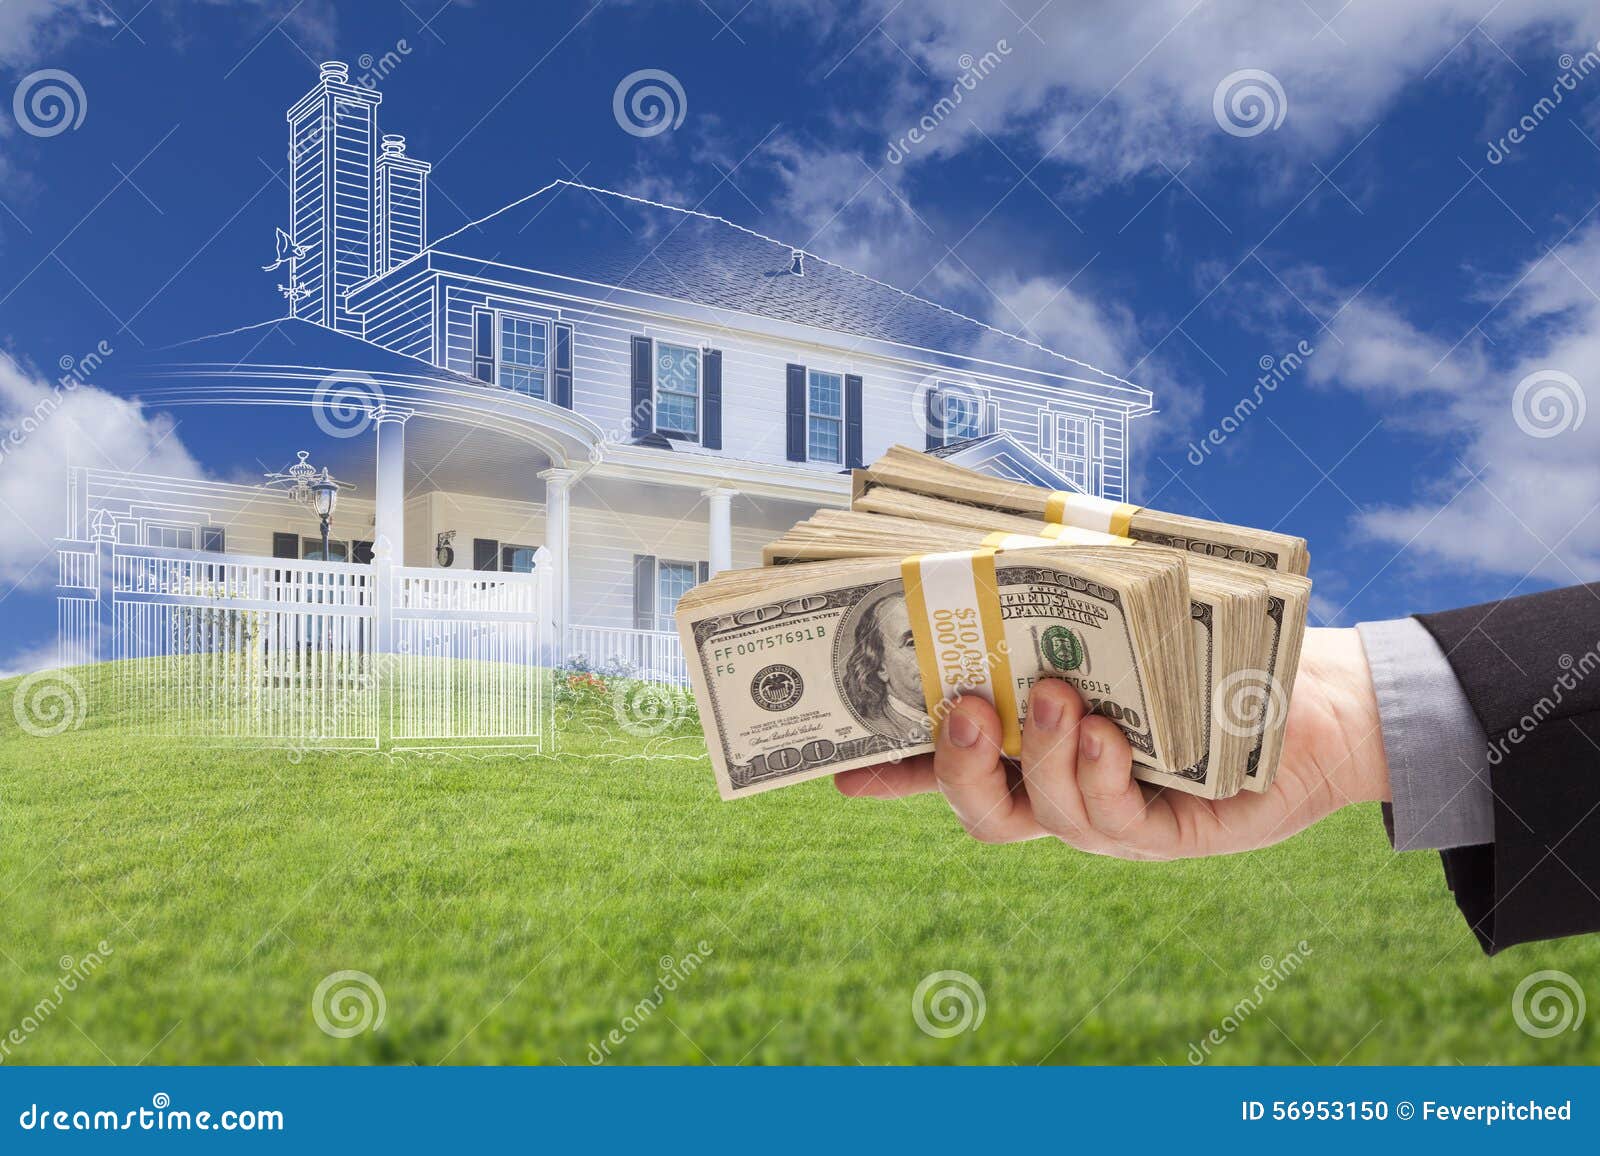 handing over thousands of dollars with ghosted house drawing beh